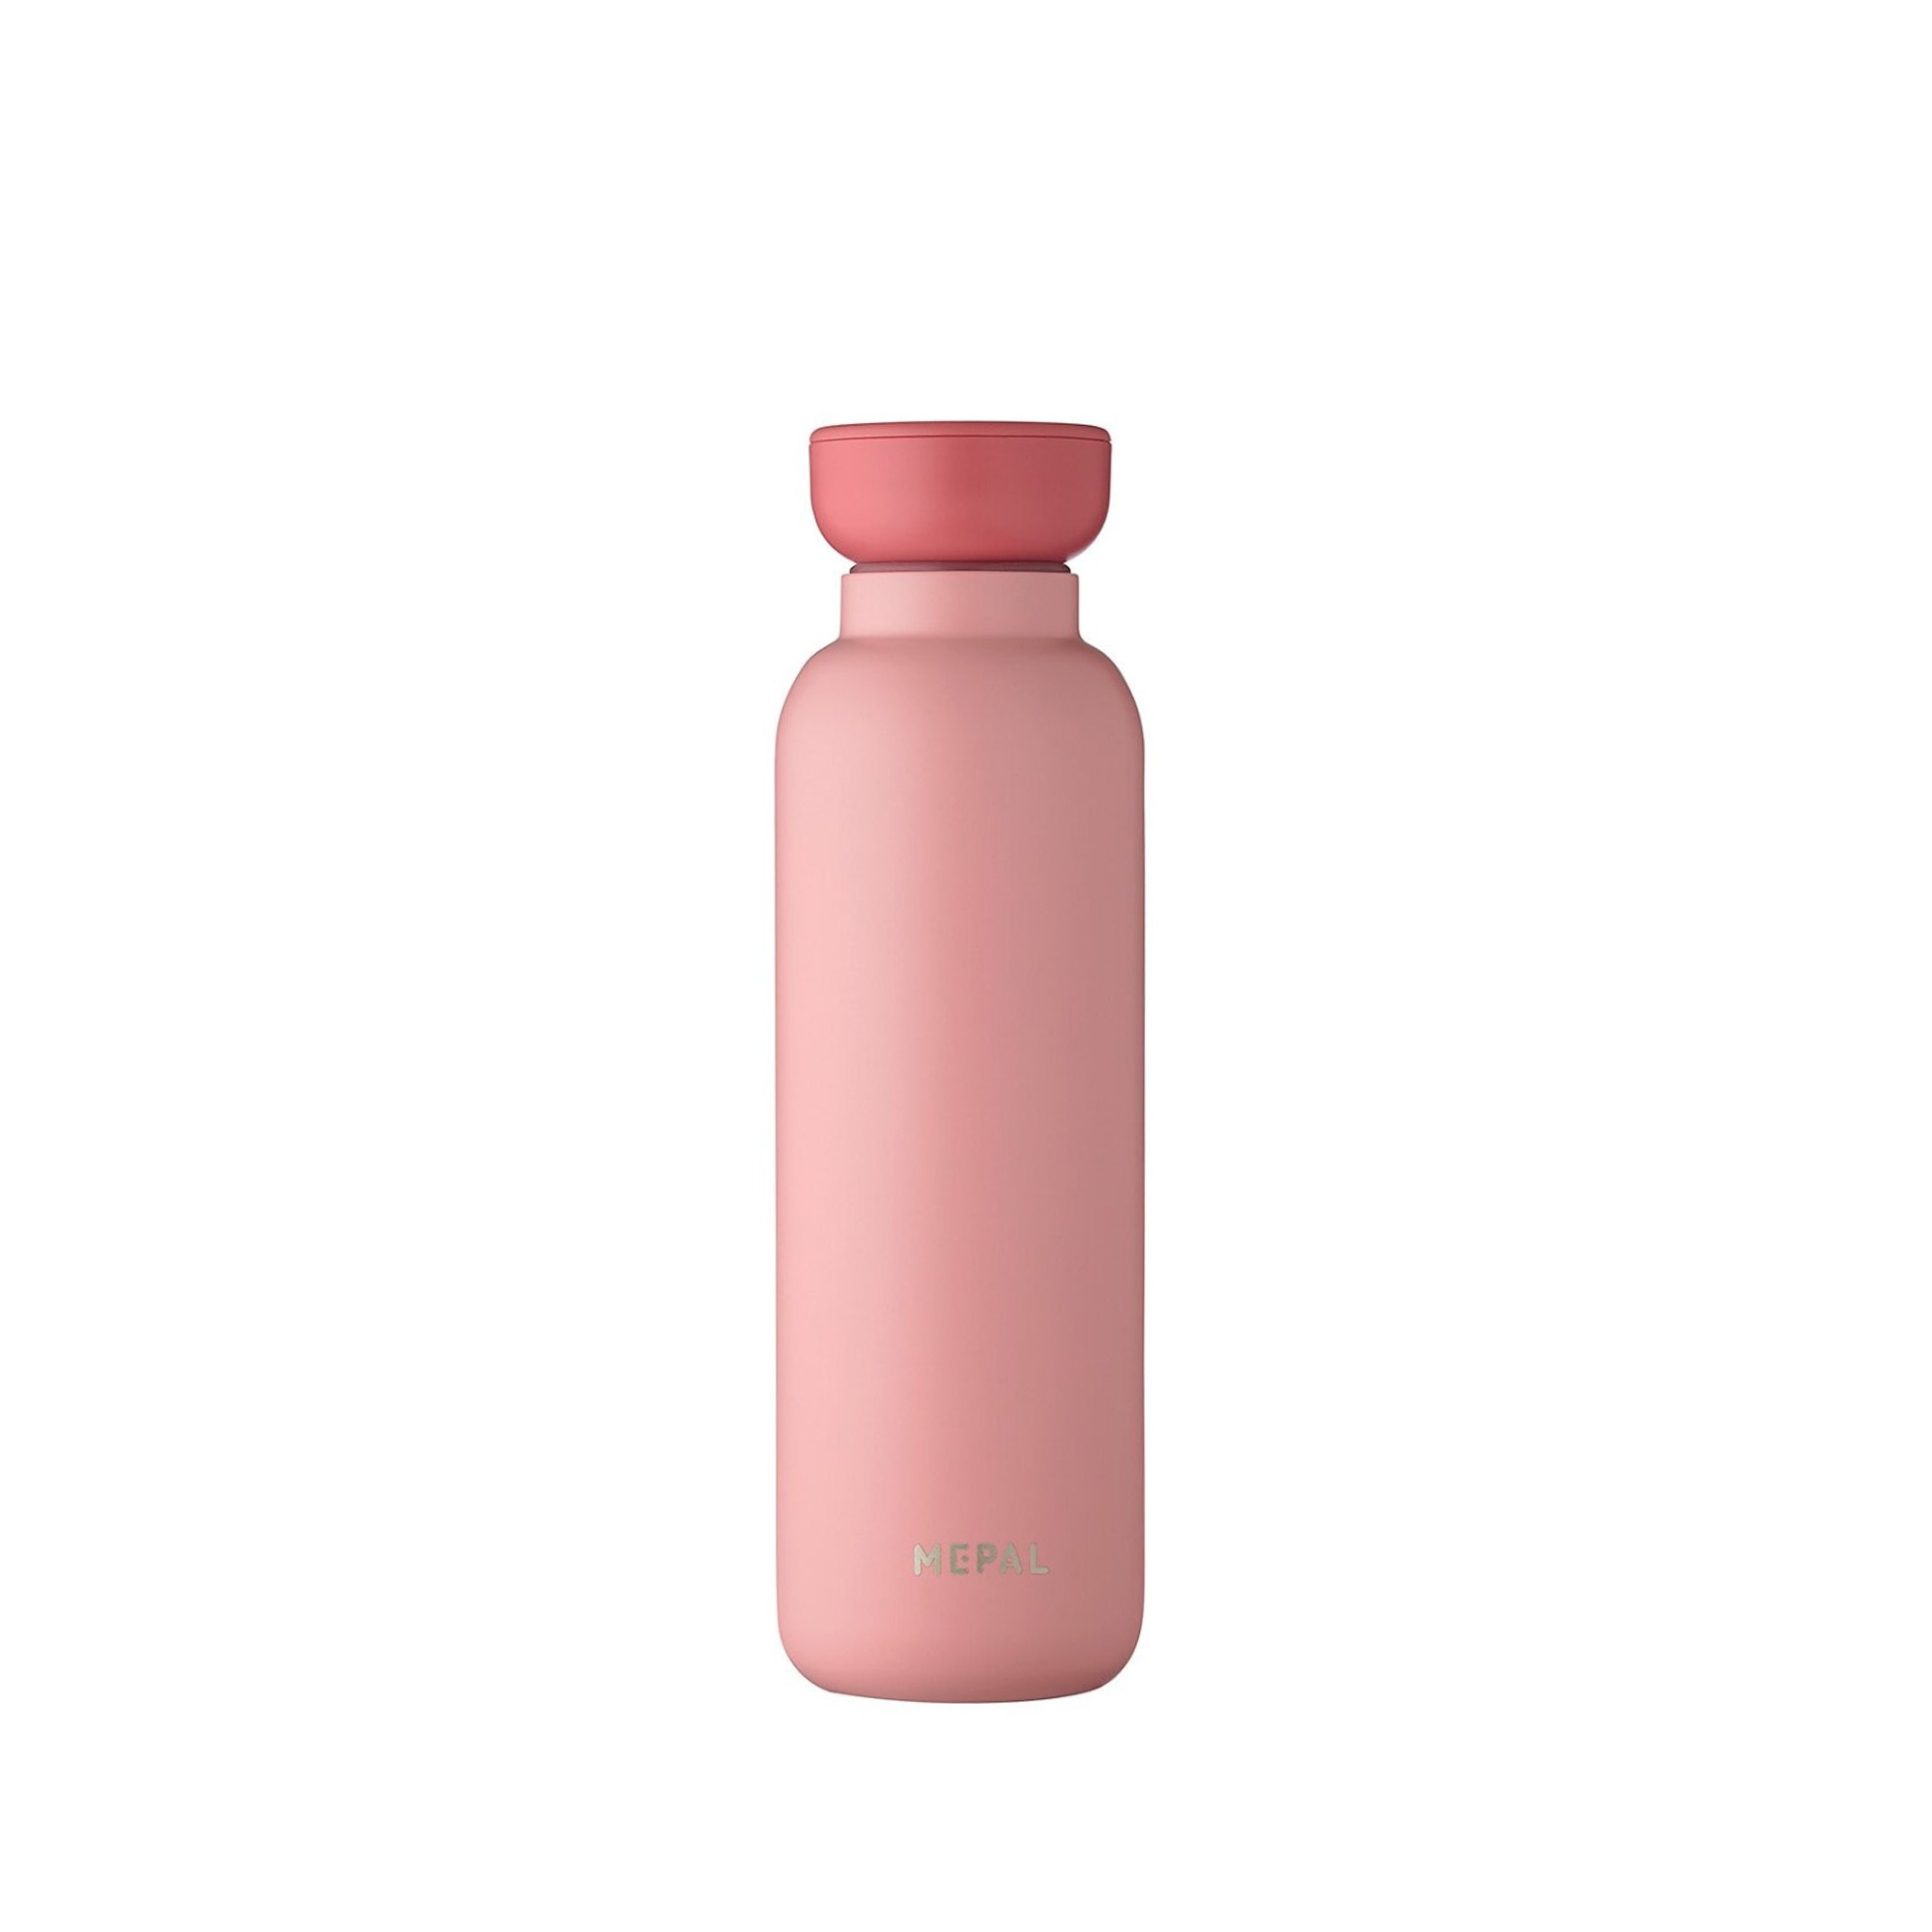 Mepal - Ellipse thermal bottle 500ml - different colors